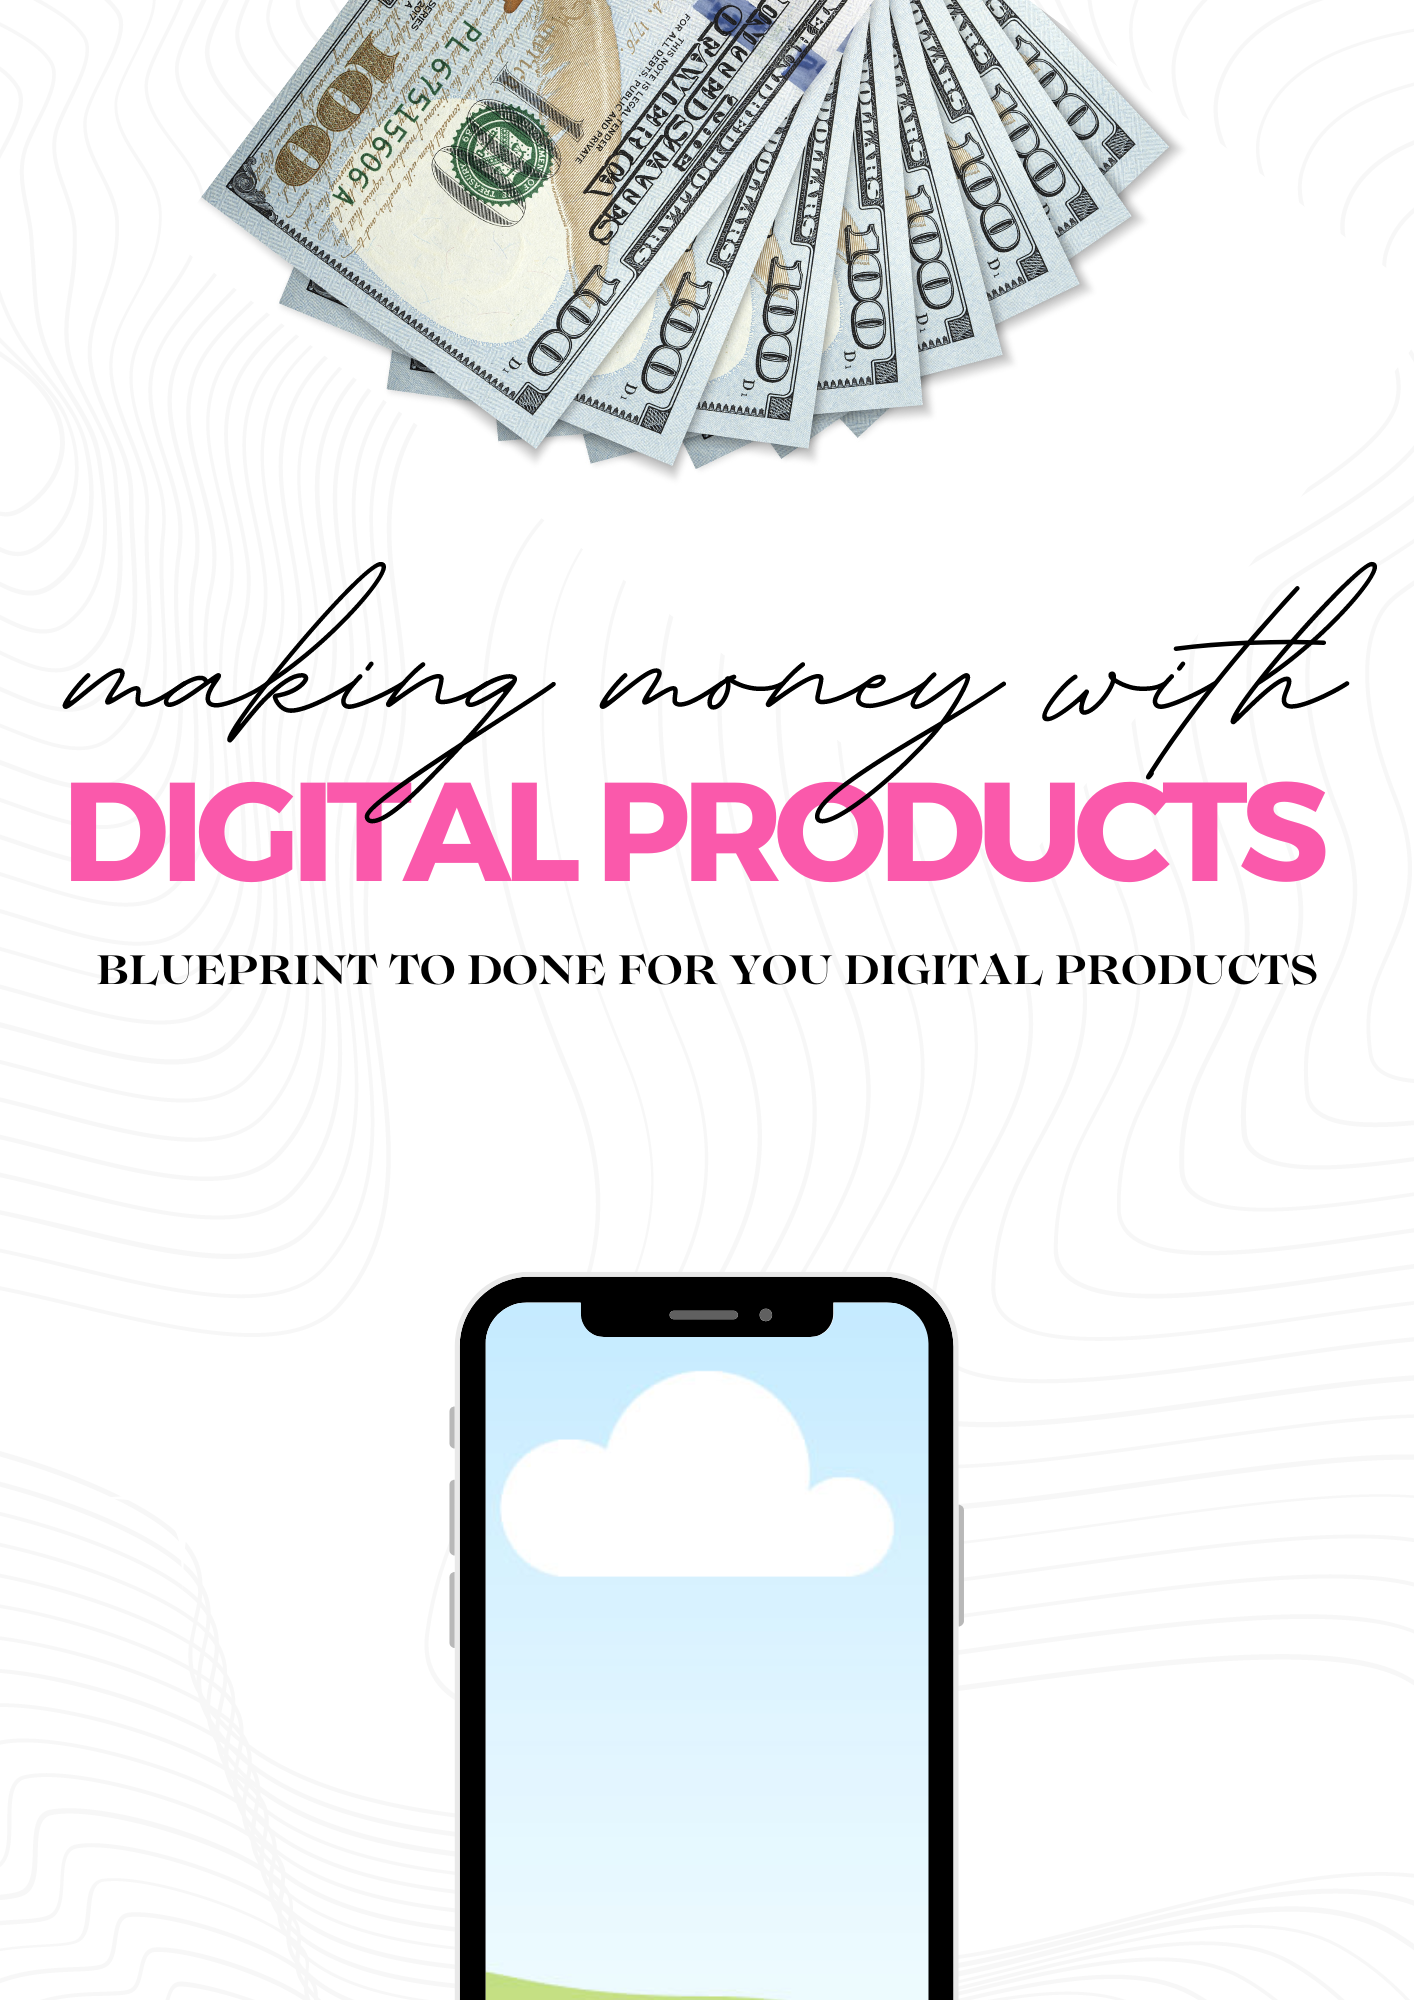 freebie!!! Learn how to sell digital products